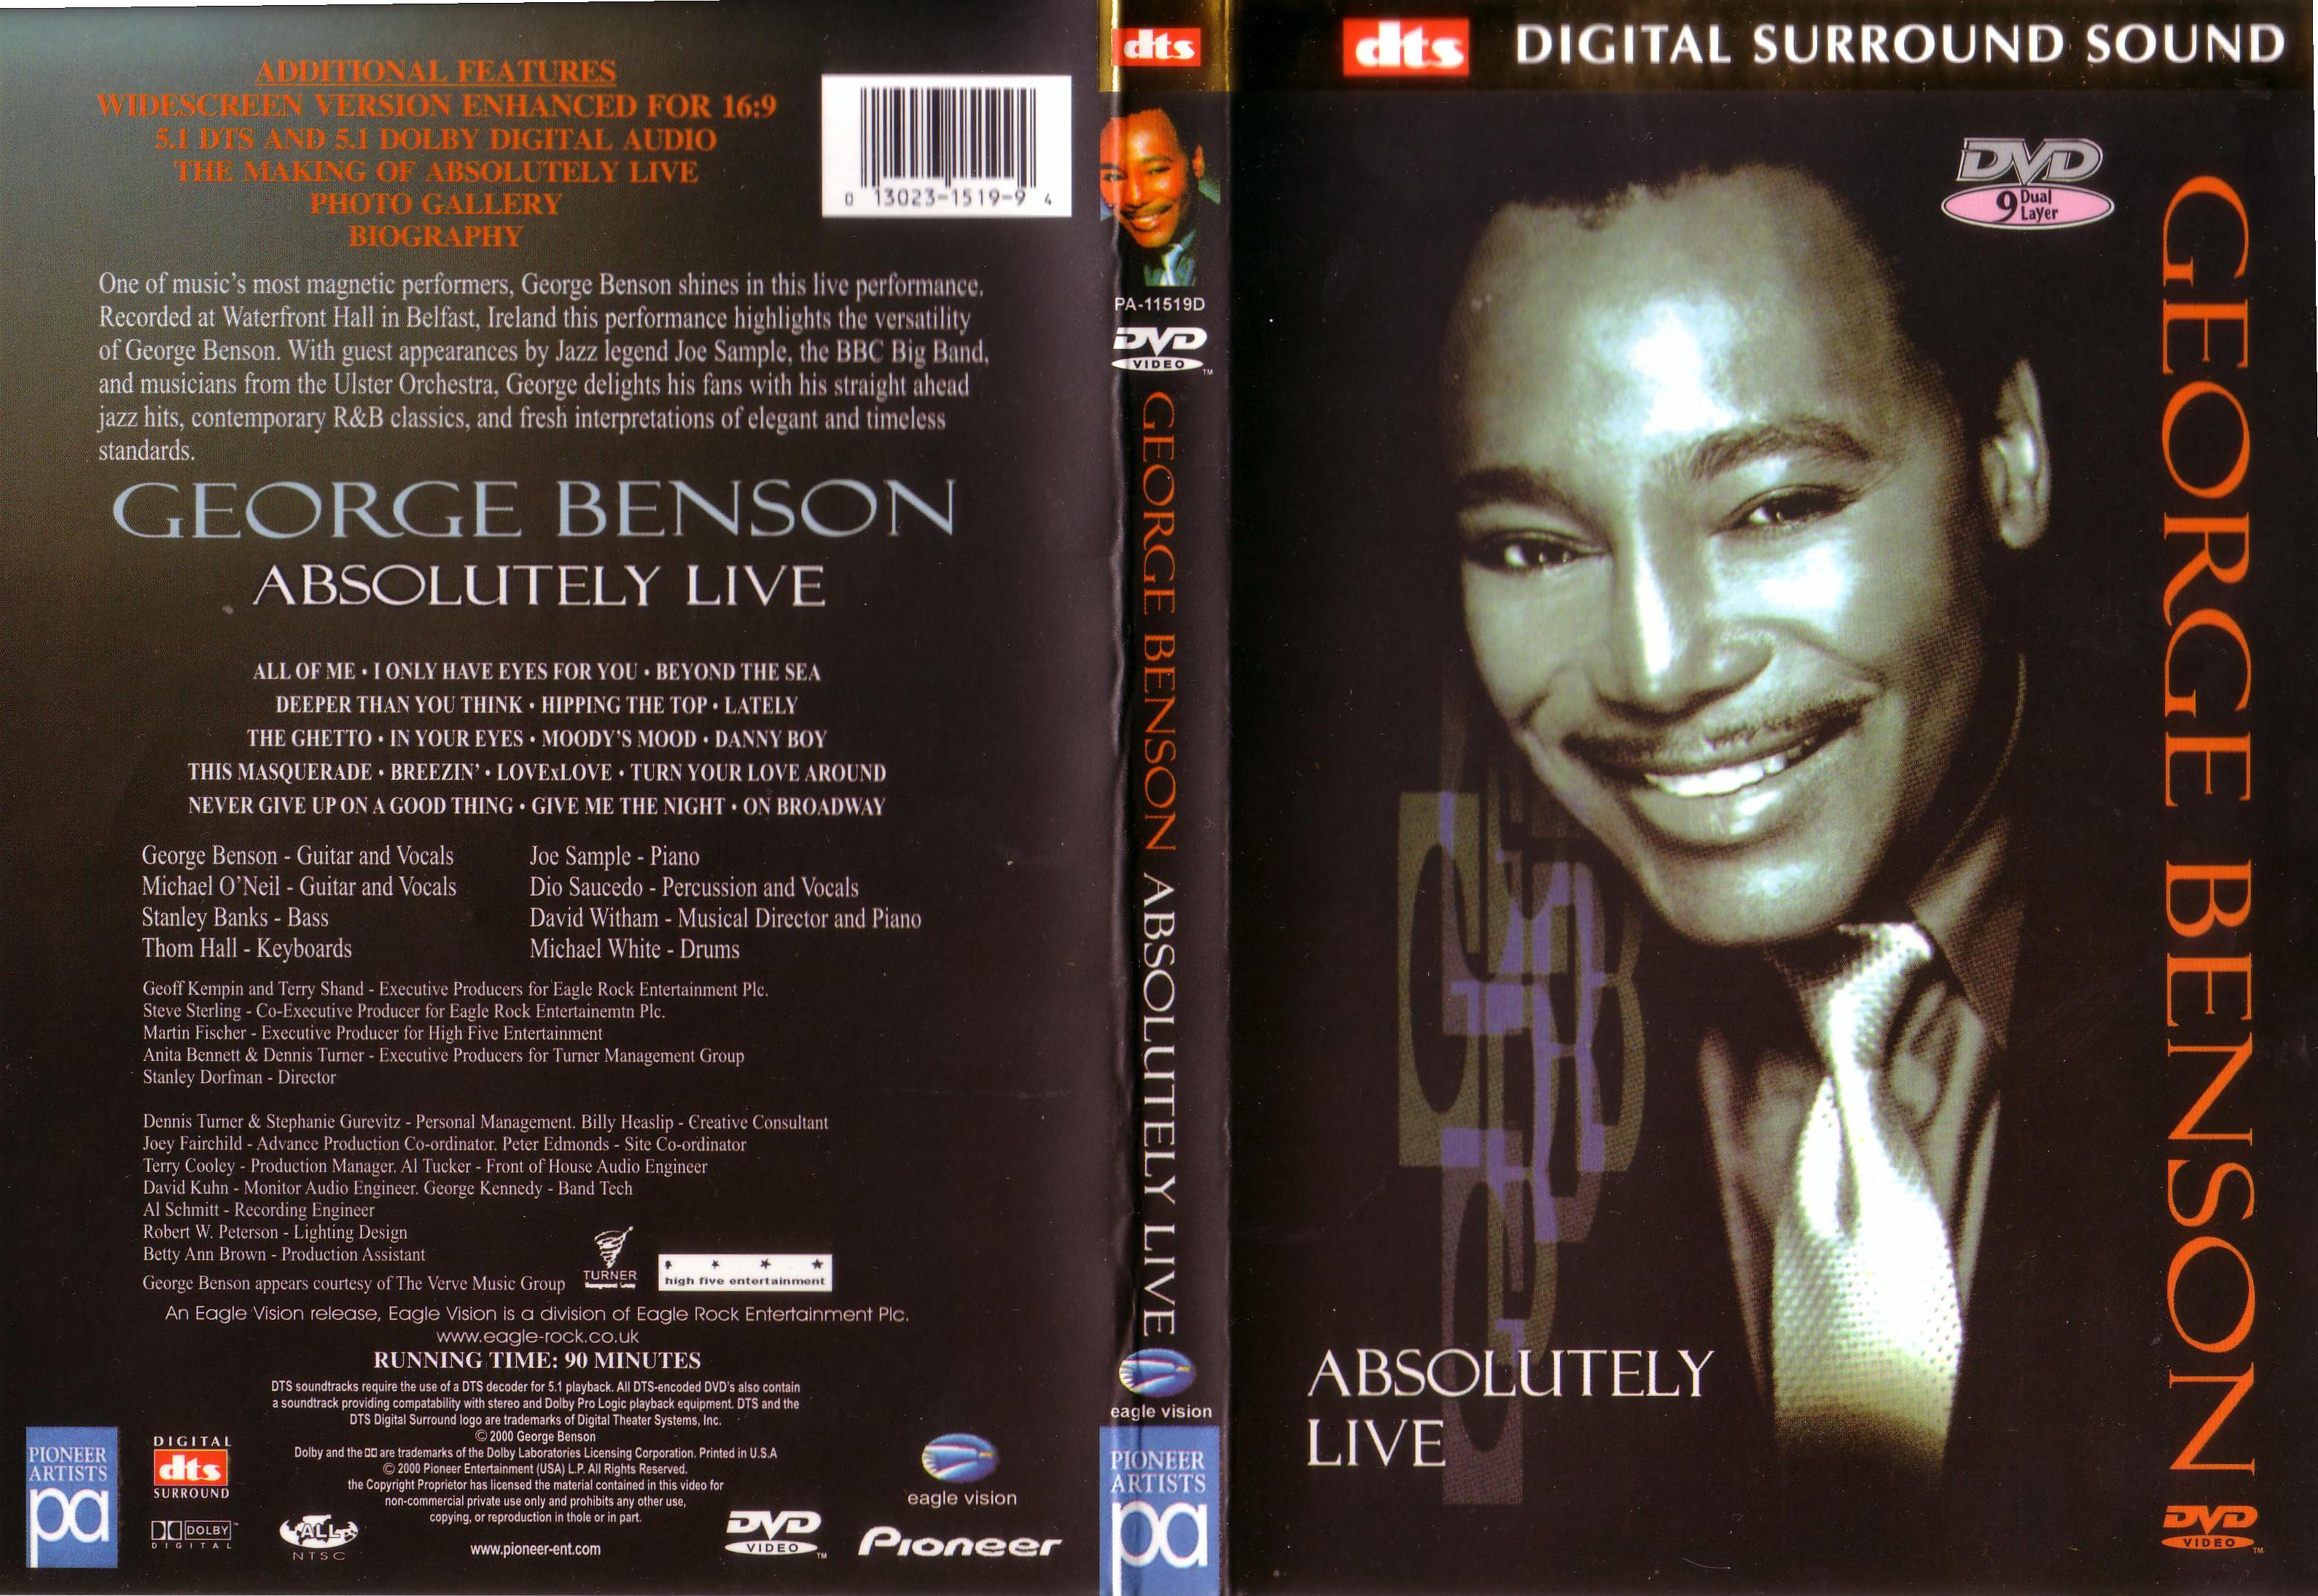 Jaquette DVD George Benson Absolutely Live